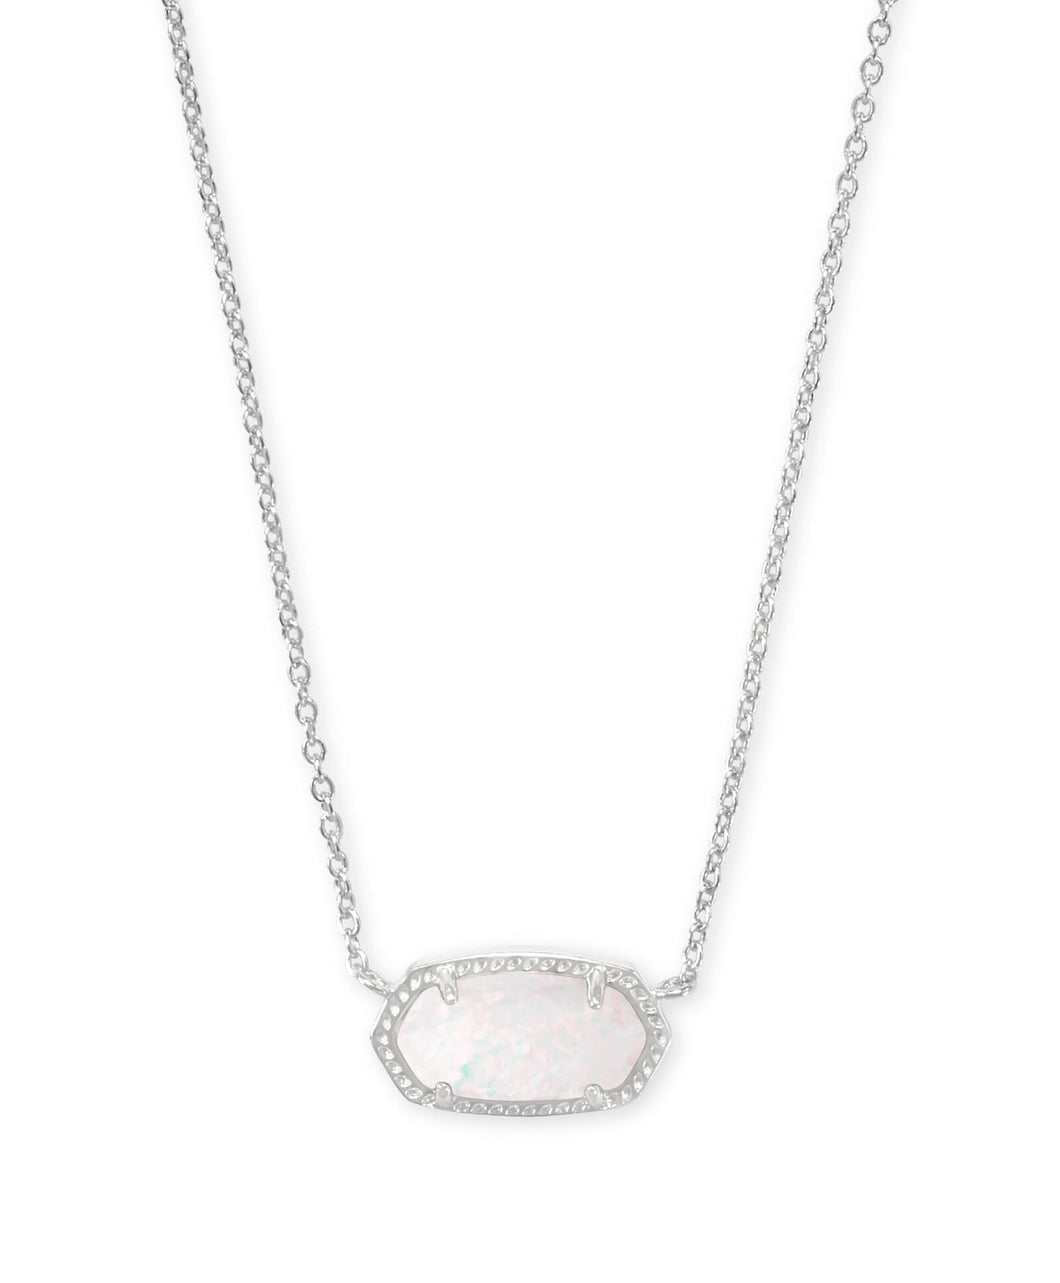 Kendra Scott Ever Rose Gold Pendant Necklace in White Kyocera Opal |  4217717445 | Borsheims